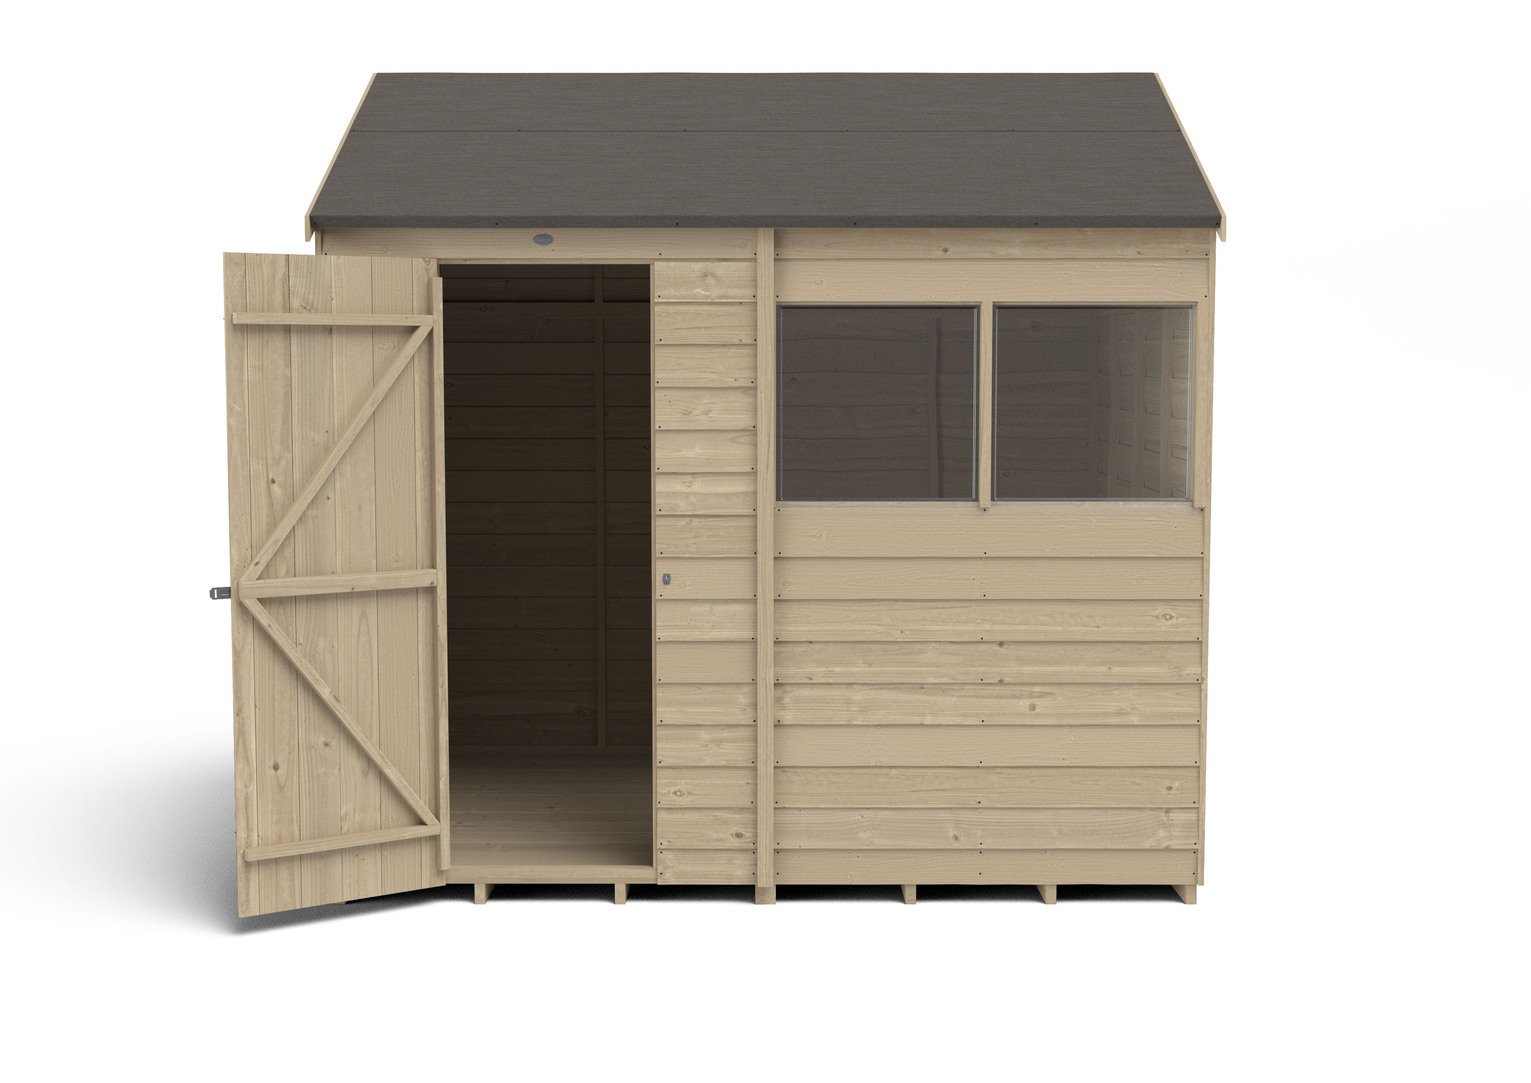 Forest Garden Overlap Reverse Apex Shed - 8 x 6ft